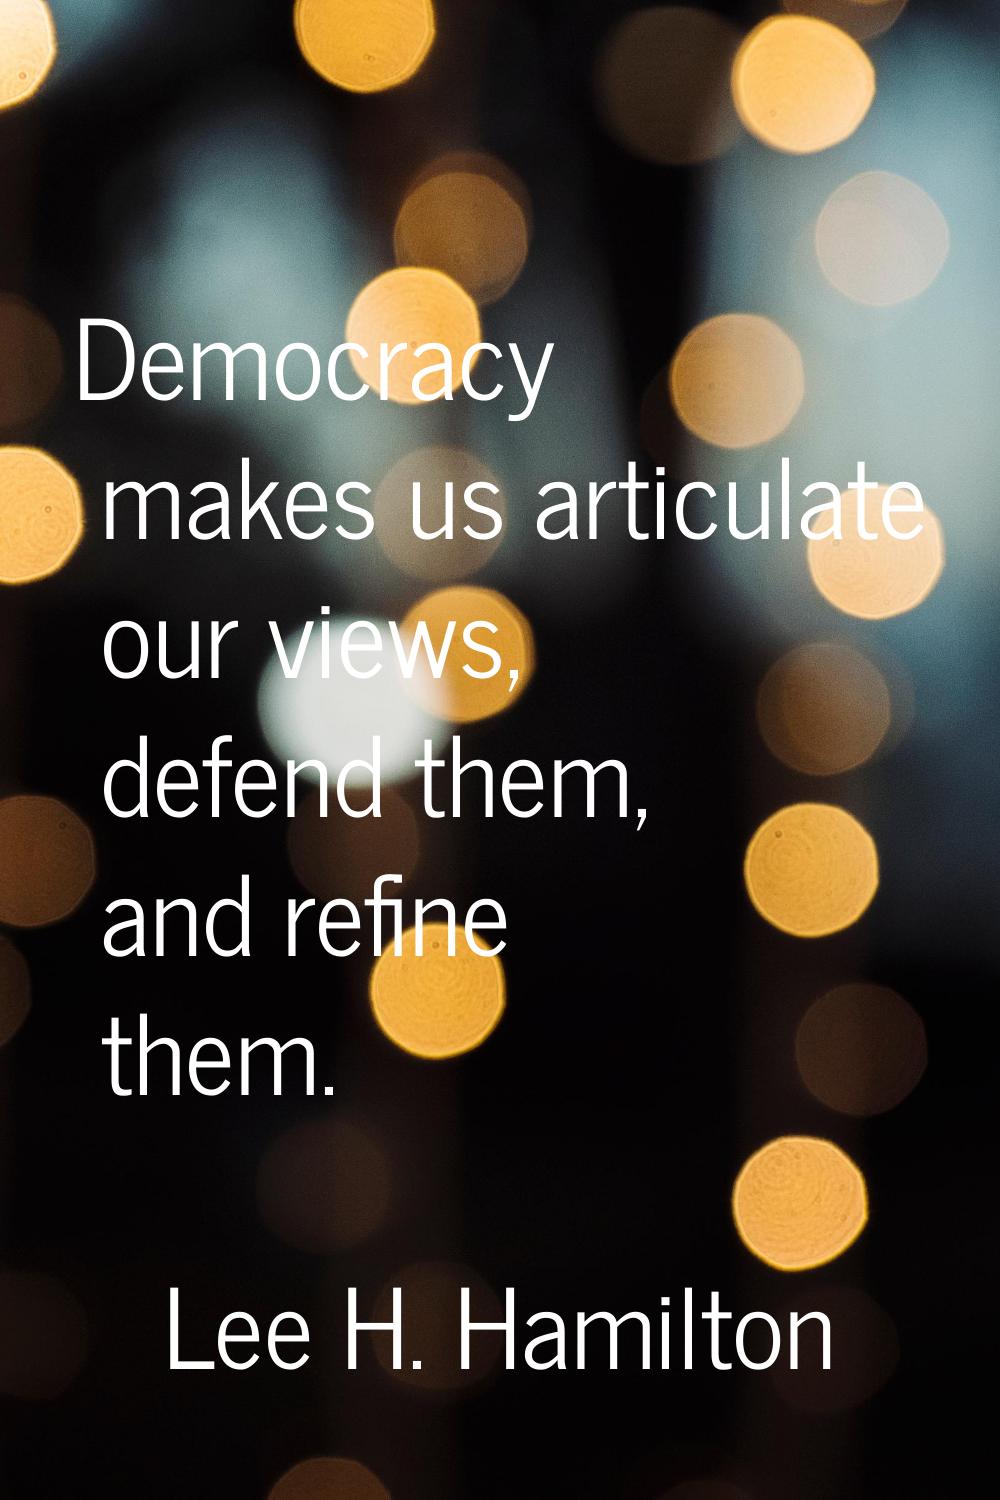 Democracy makes us articulate our views, defend them, and refine them.